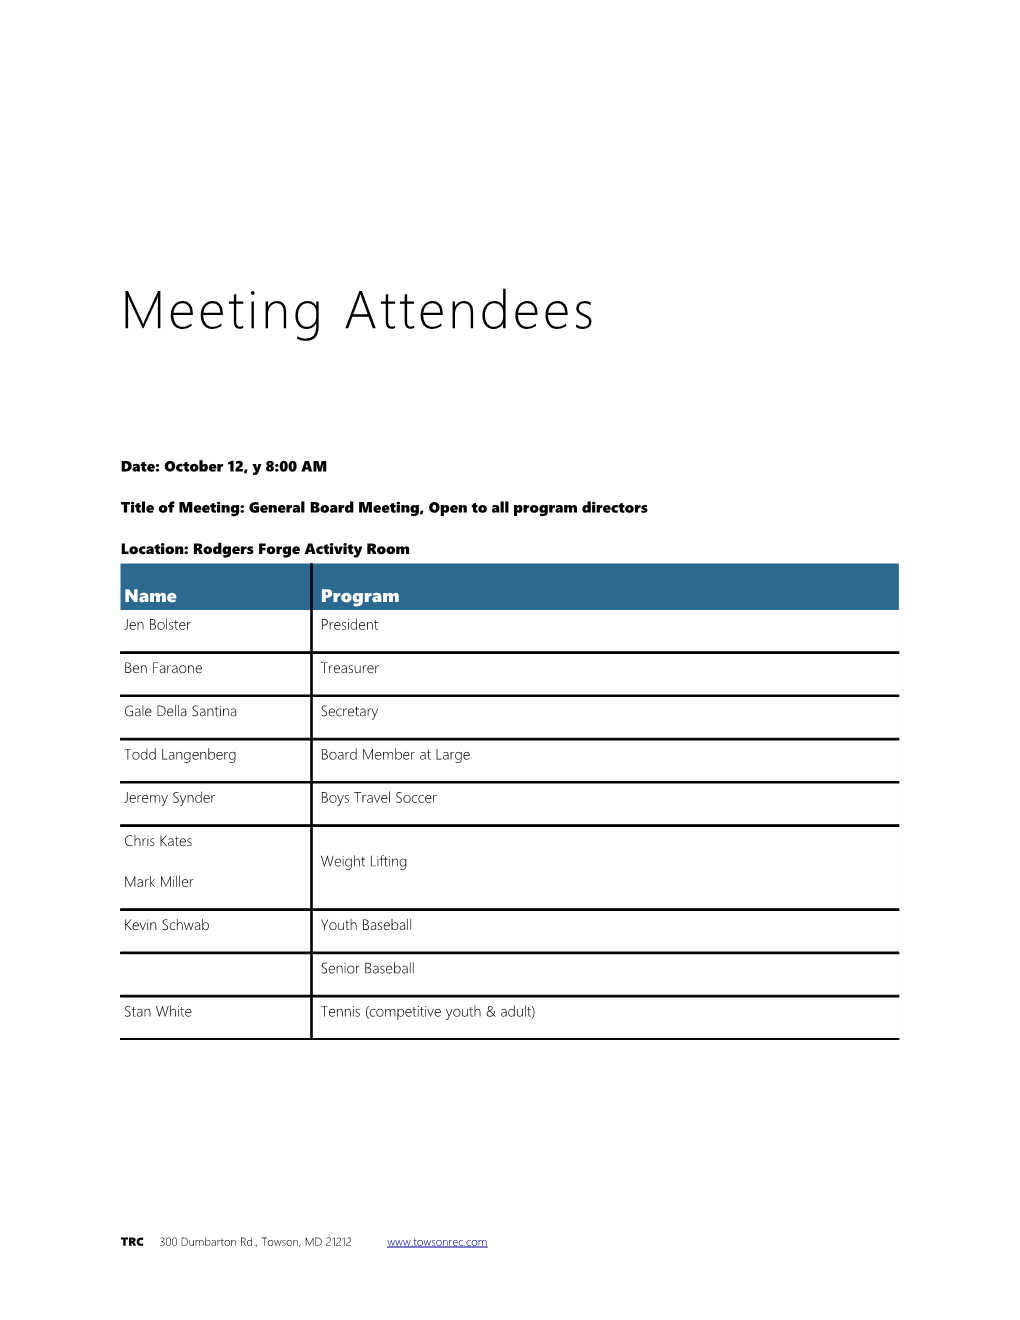 Title of Meeting: General Board Meeting, Open to All Program Directors